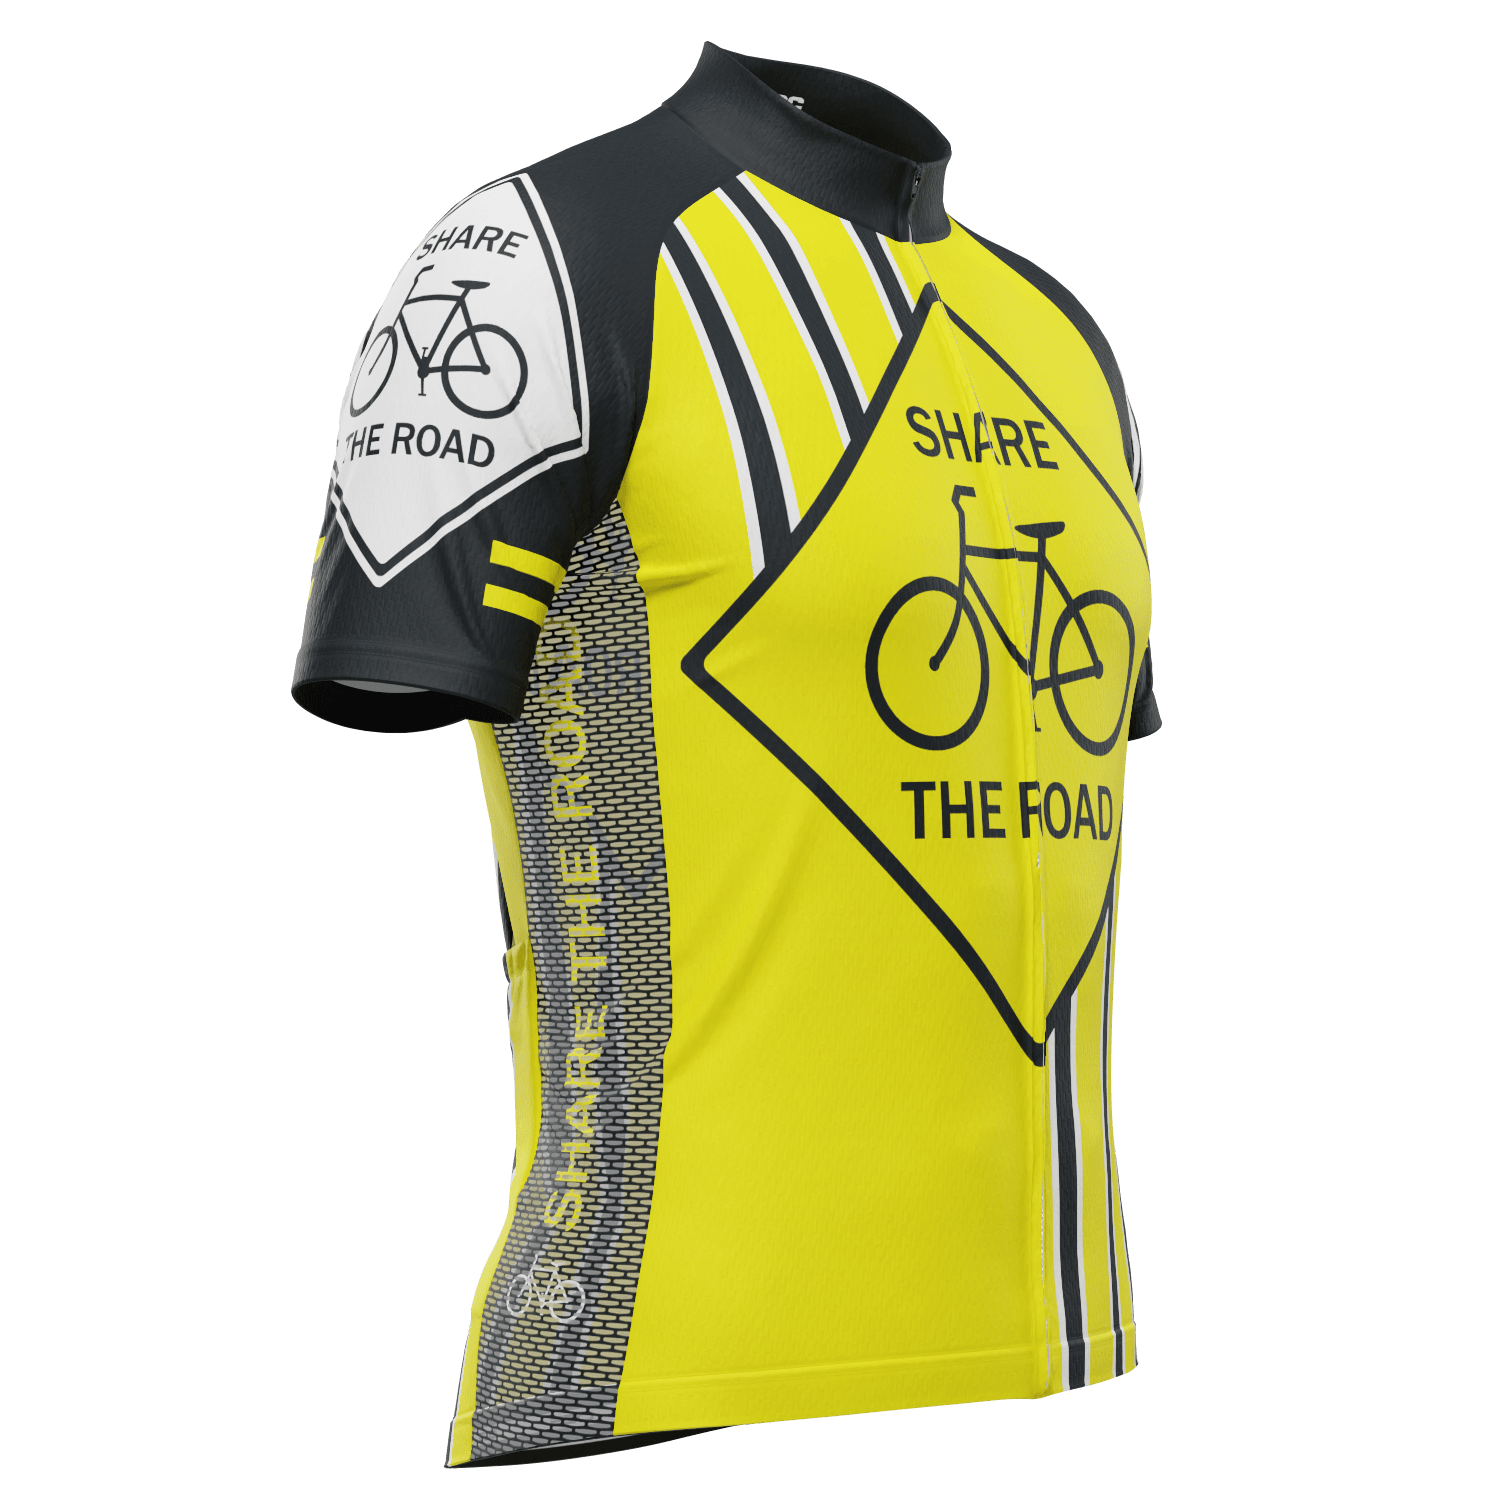 Men's Share the Road Yellow Short Sleeve Cycling Jersey